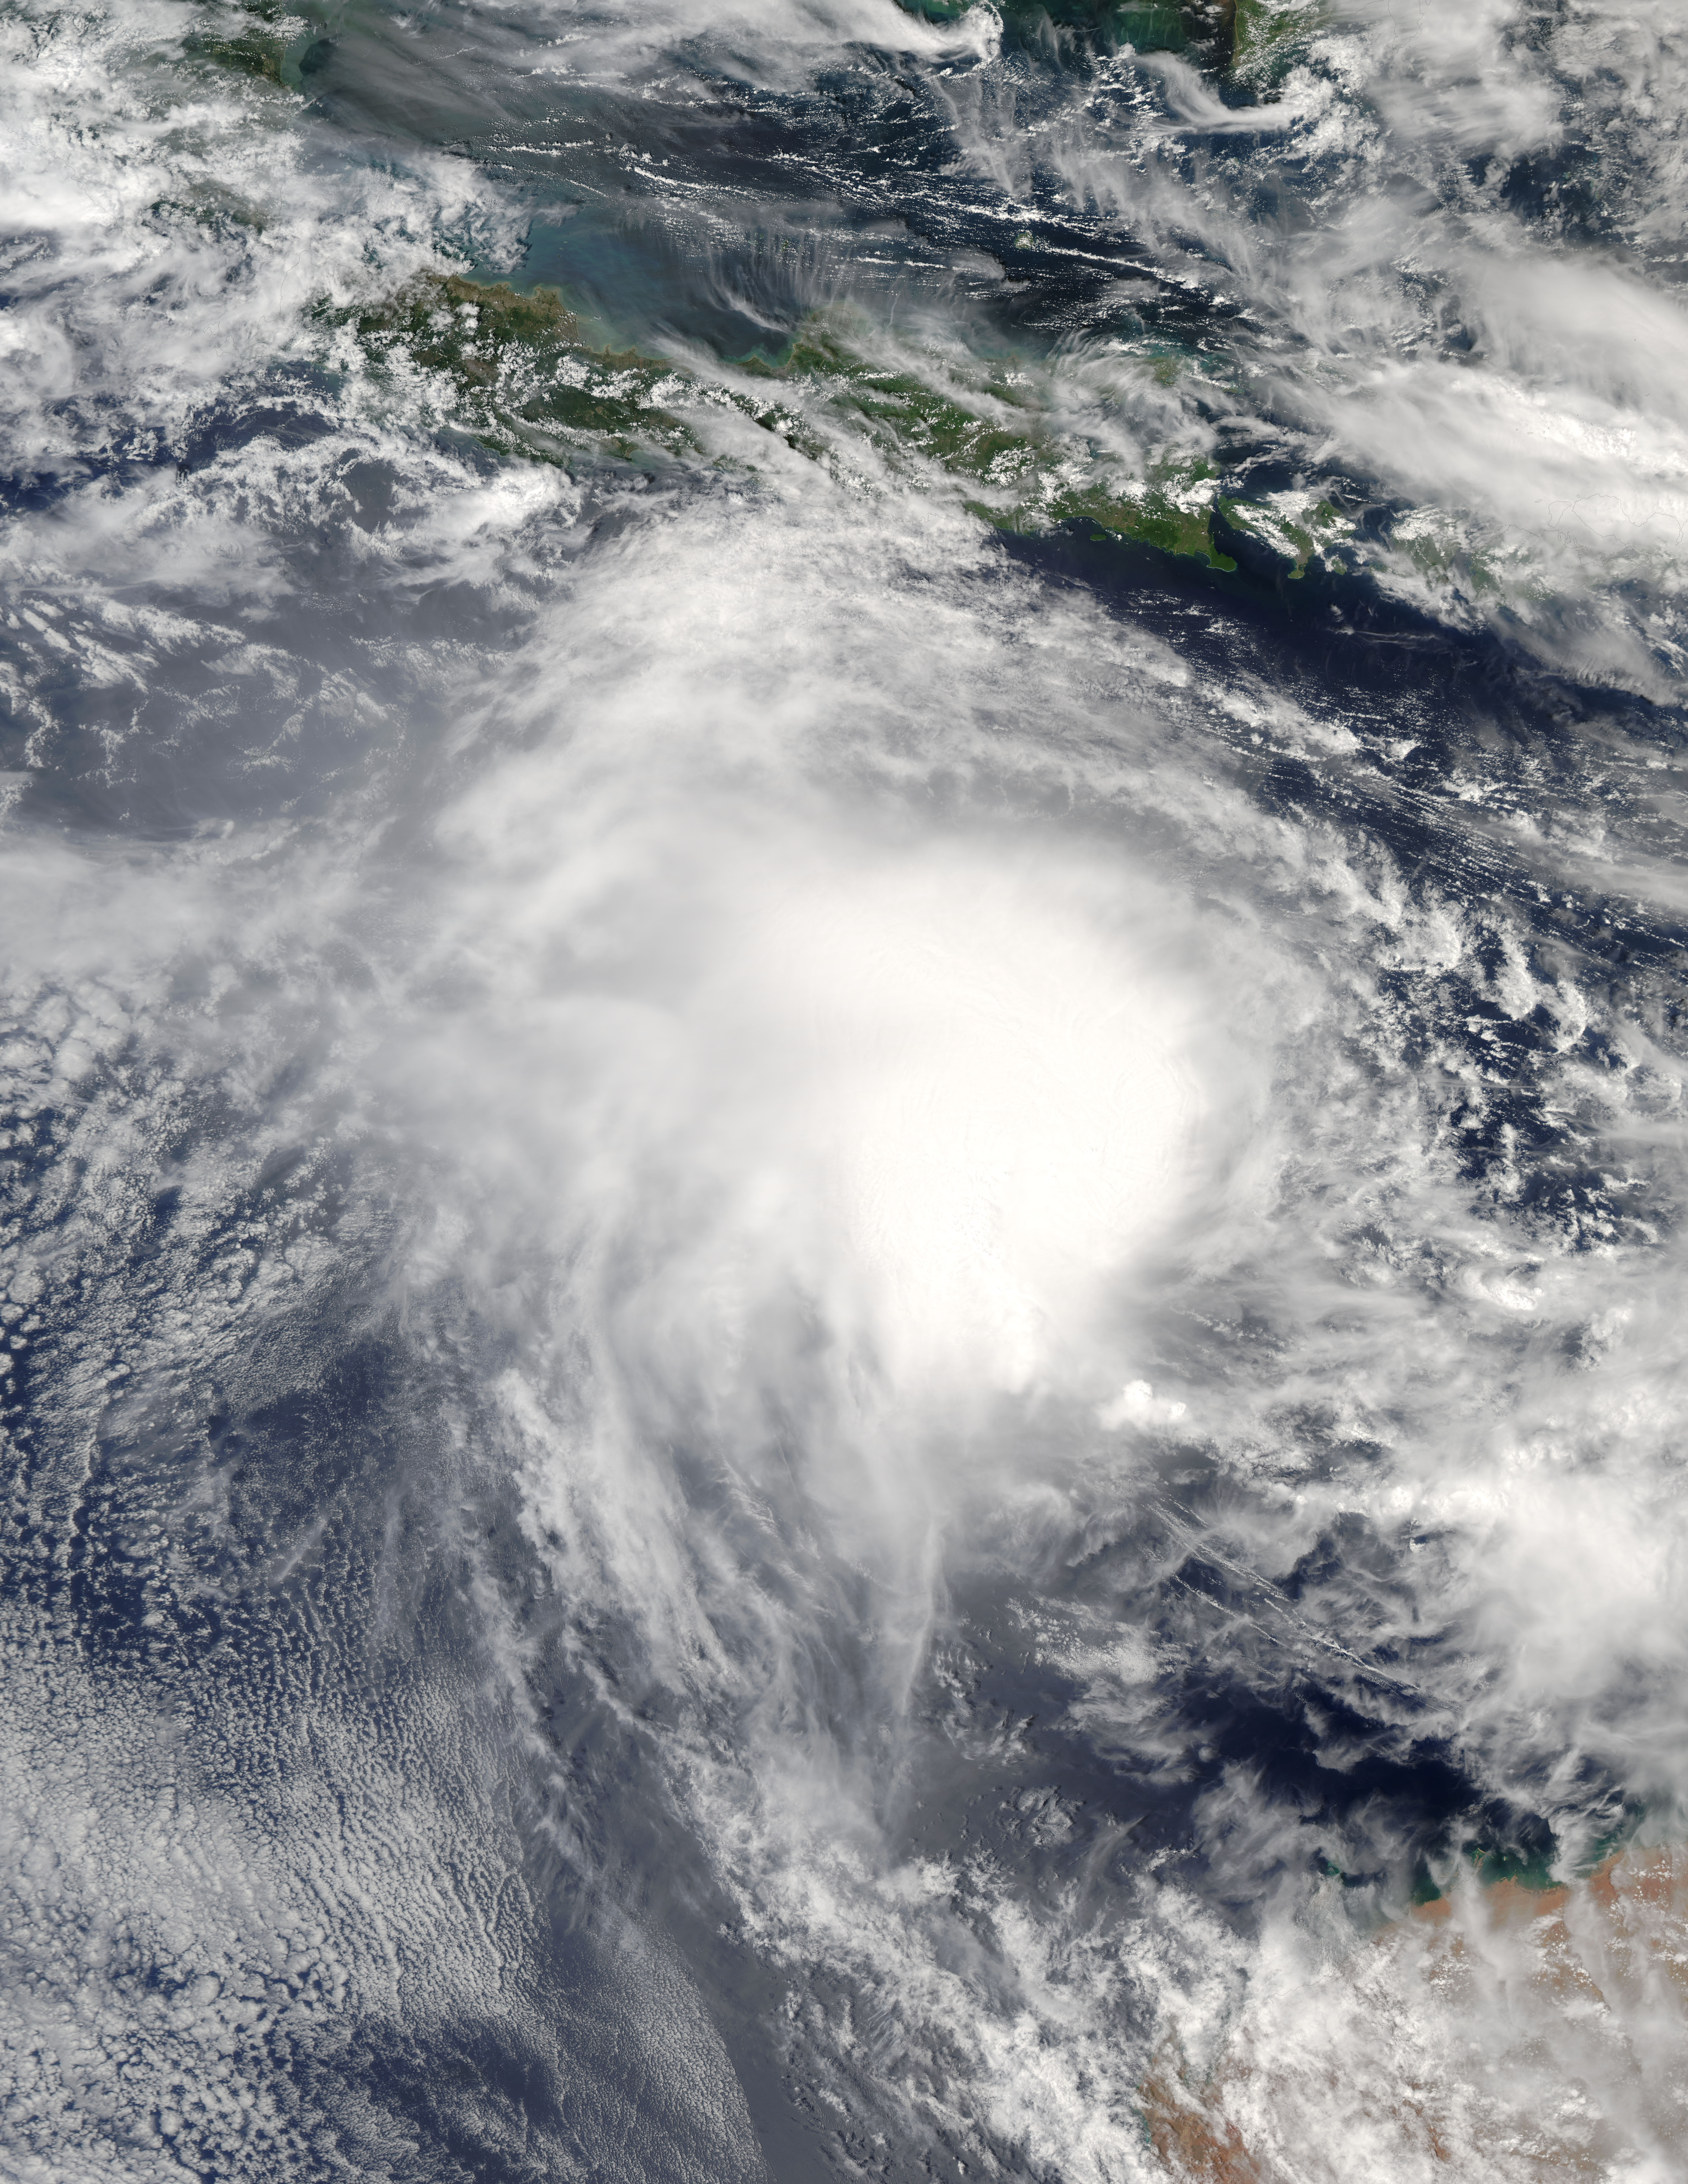 Tropical Cyclone Yvette (02S) off Australia - related image preview